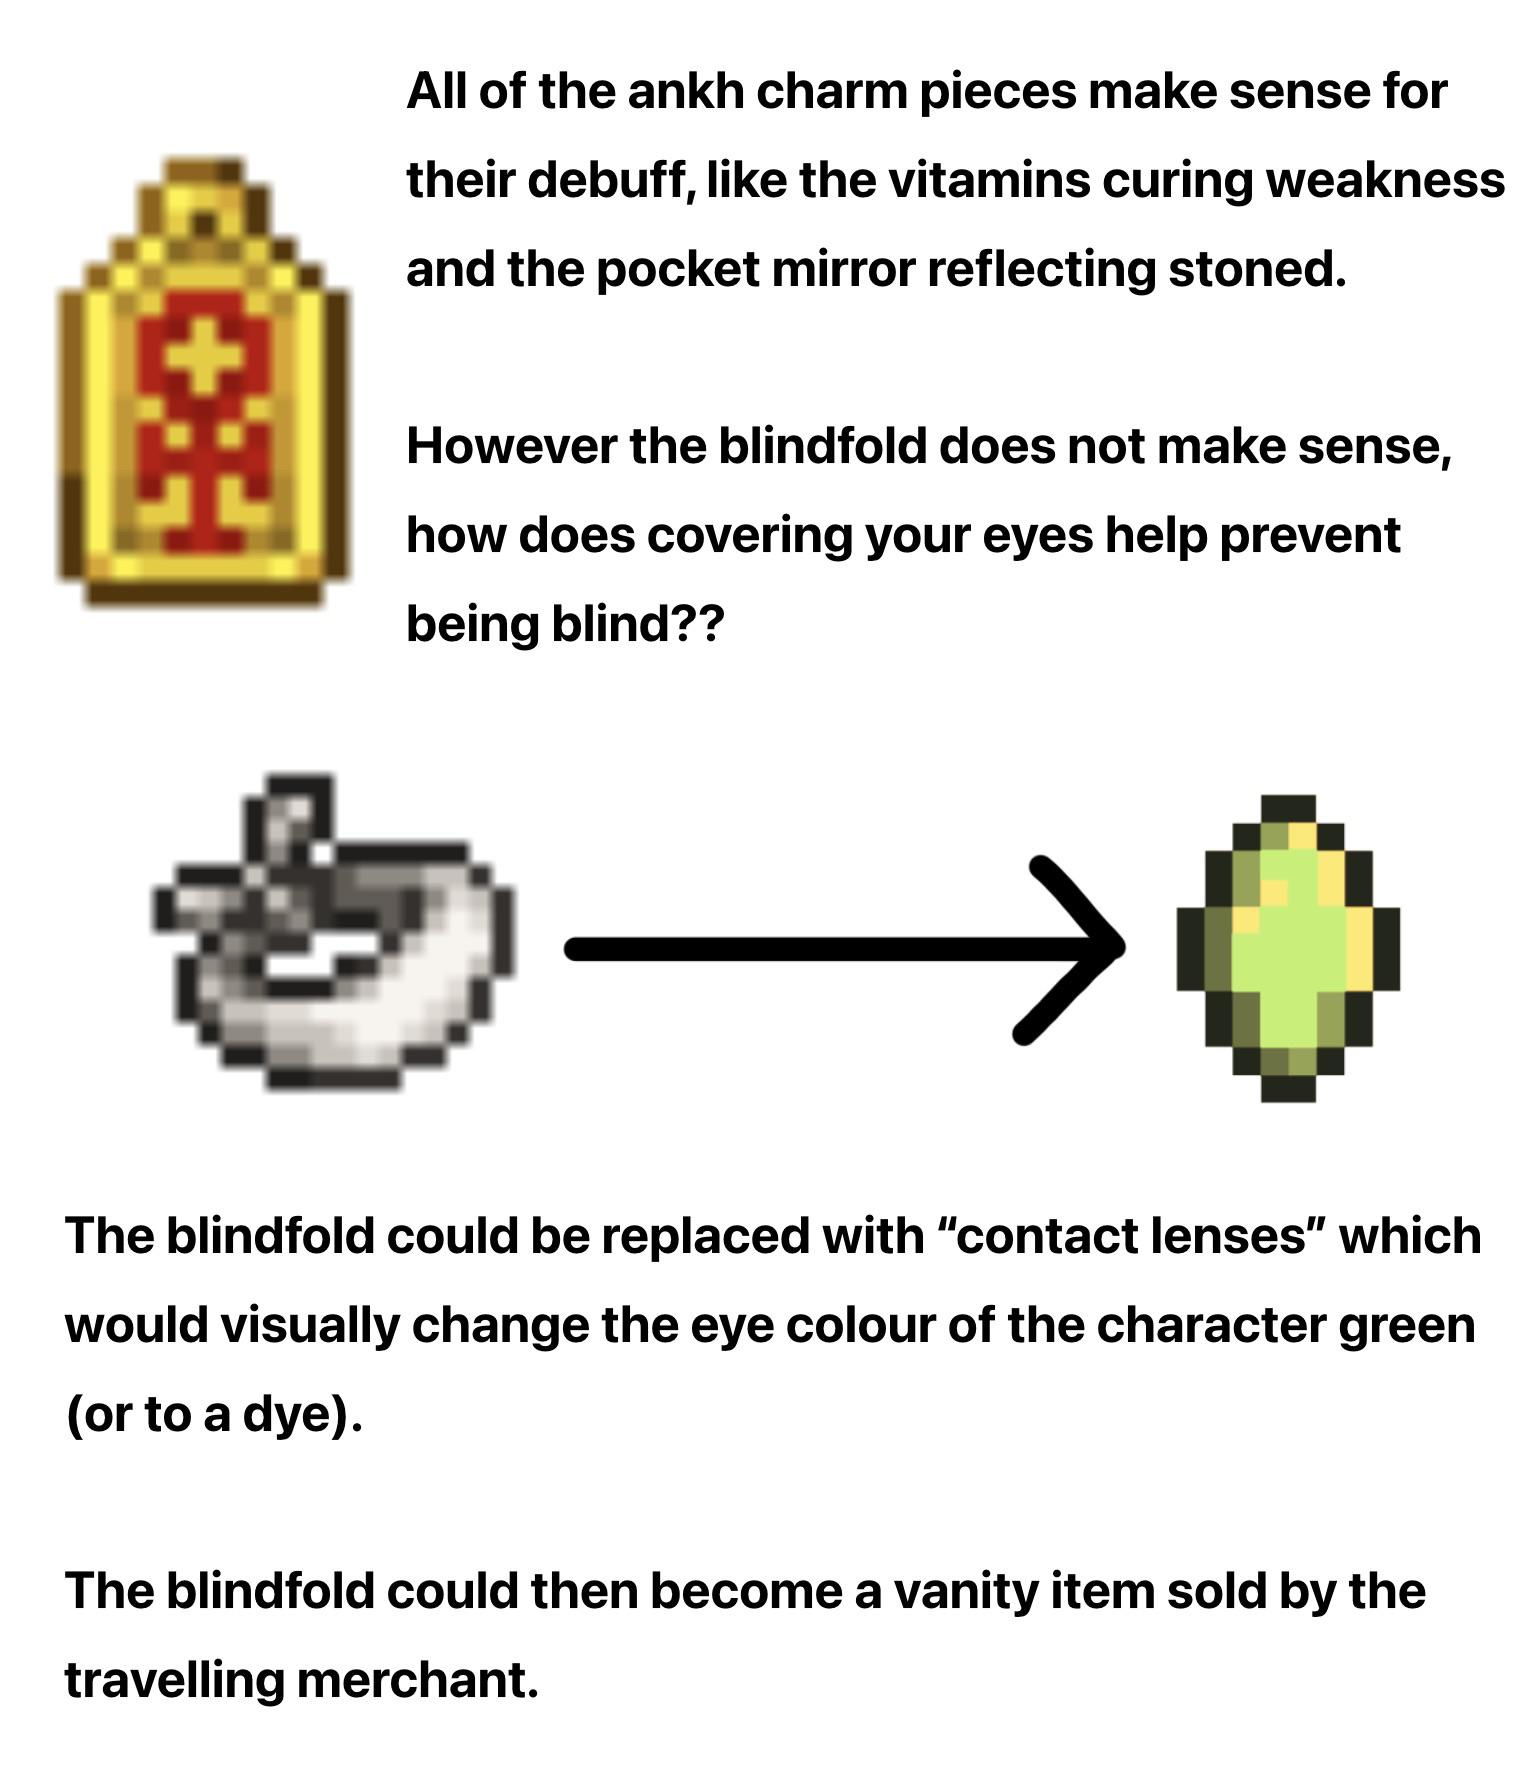 How to Get Vitamins in Terraria? 